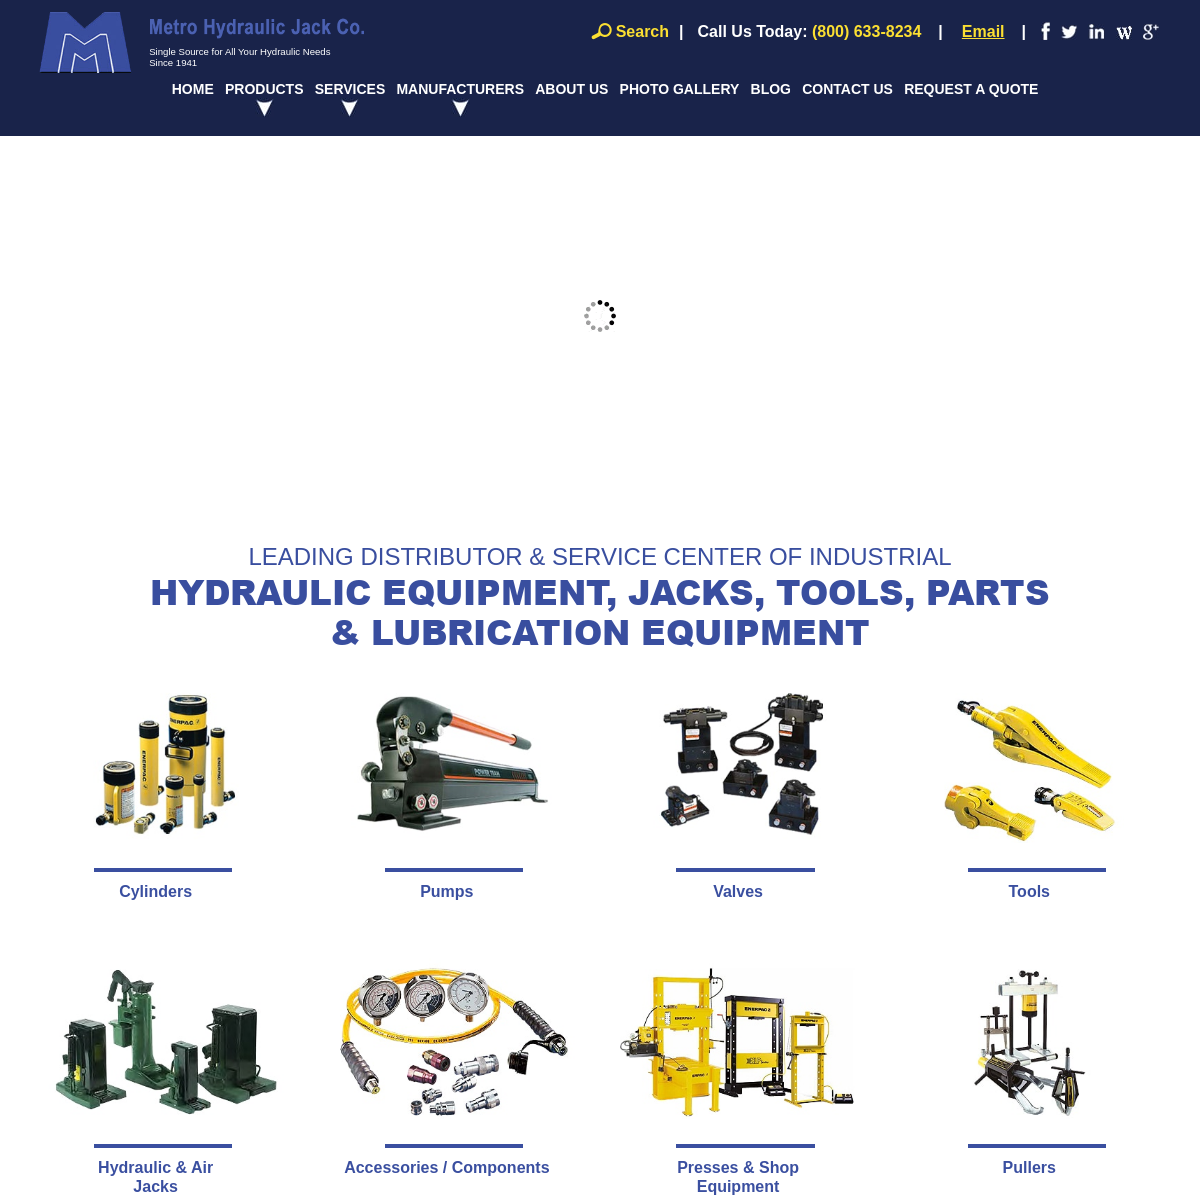 A complete backup of metrohydraulic.com